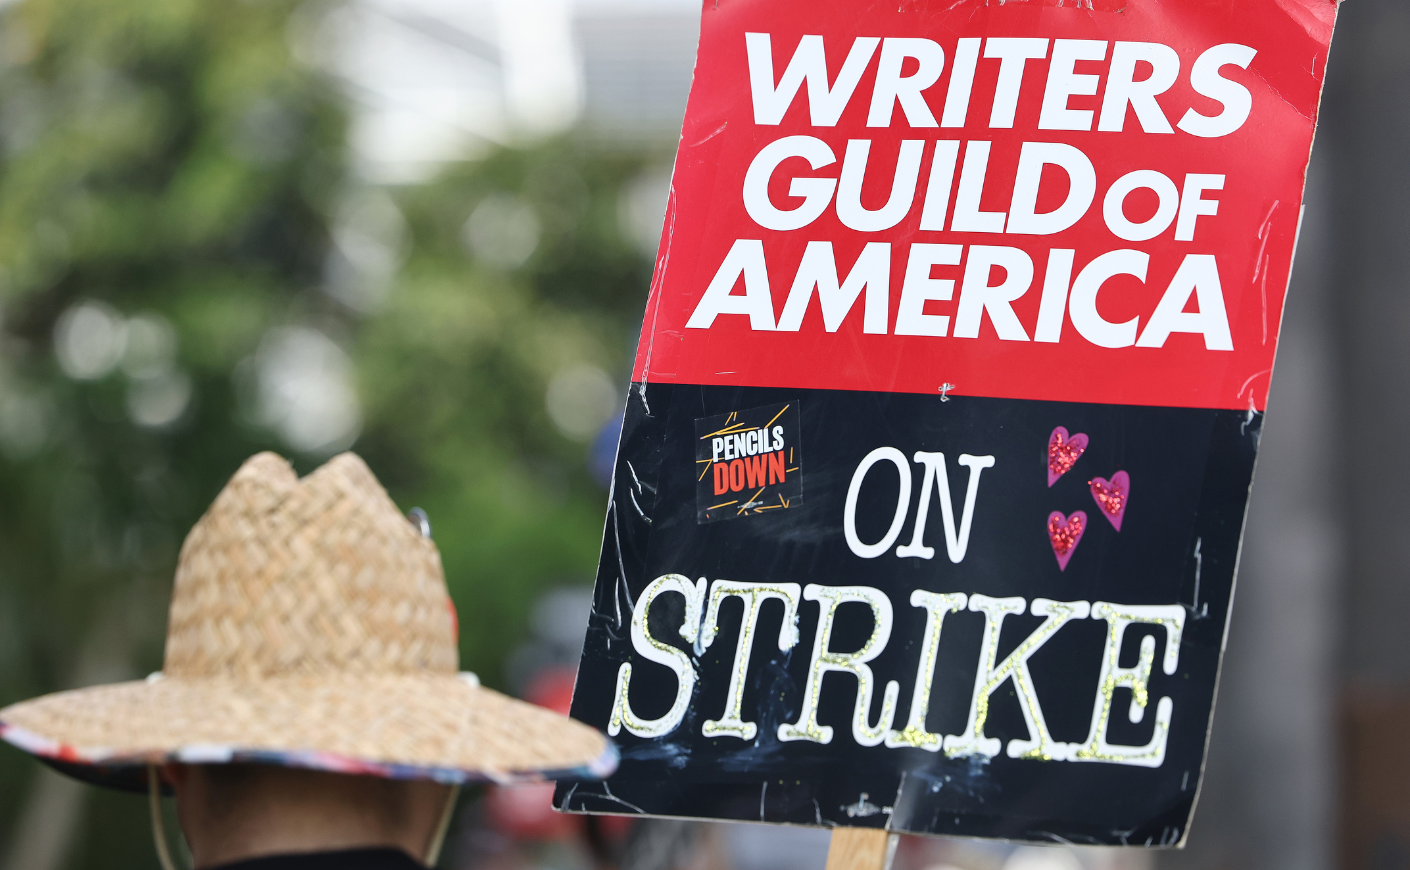 A sign reading "Writers Guild of America on strike"